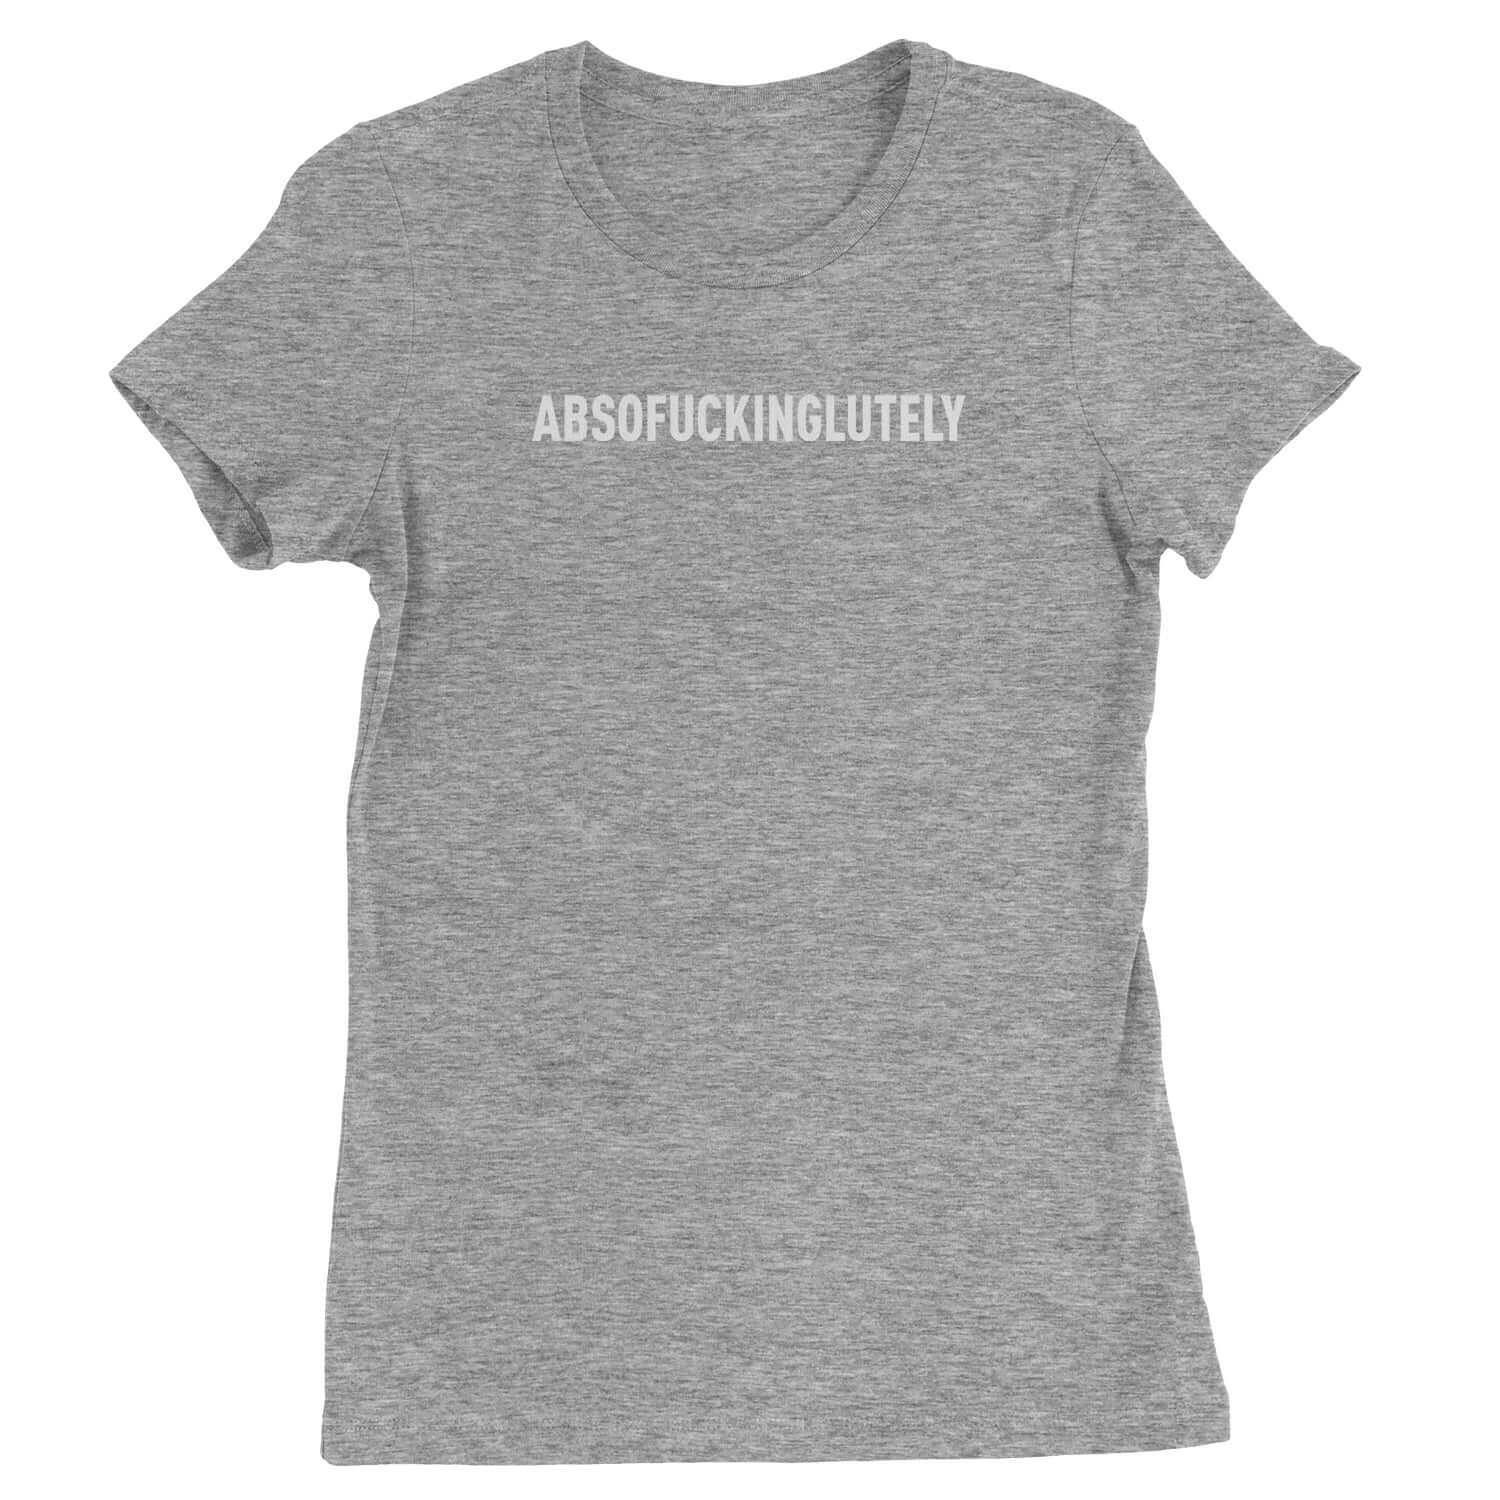 Abso f-cking lutely Womens T-shirt funny, shirt by Expression Tees